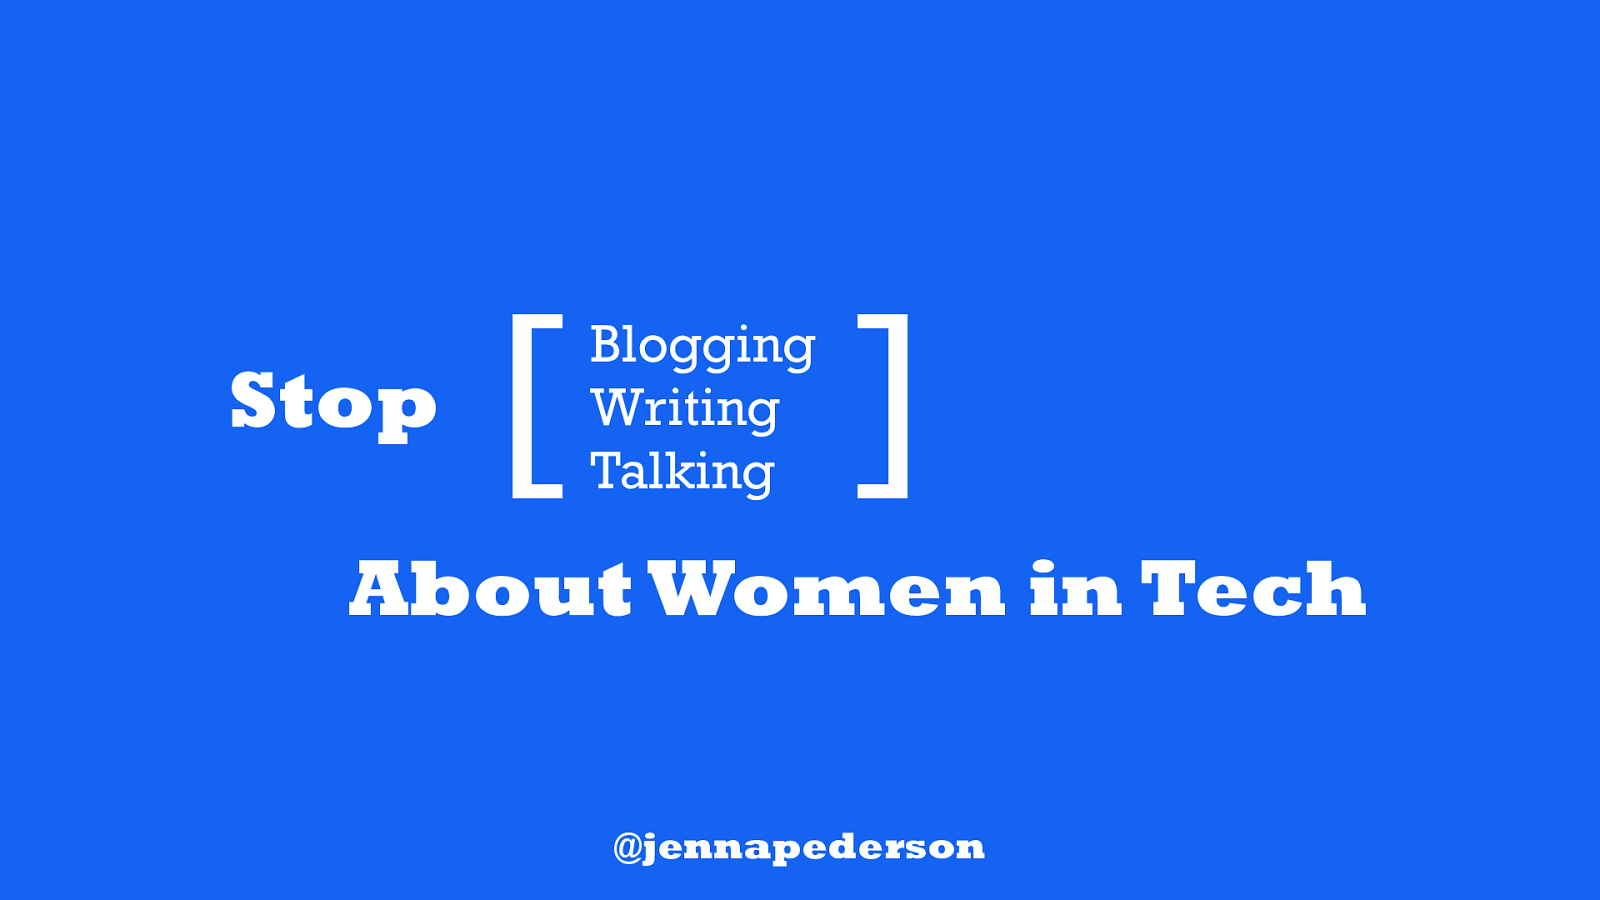 Stop Blogging About Women in Tech